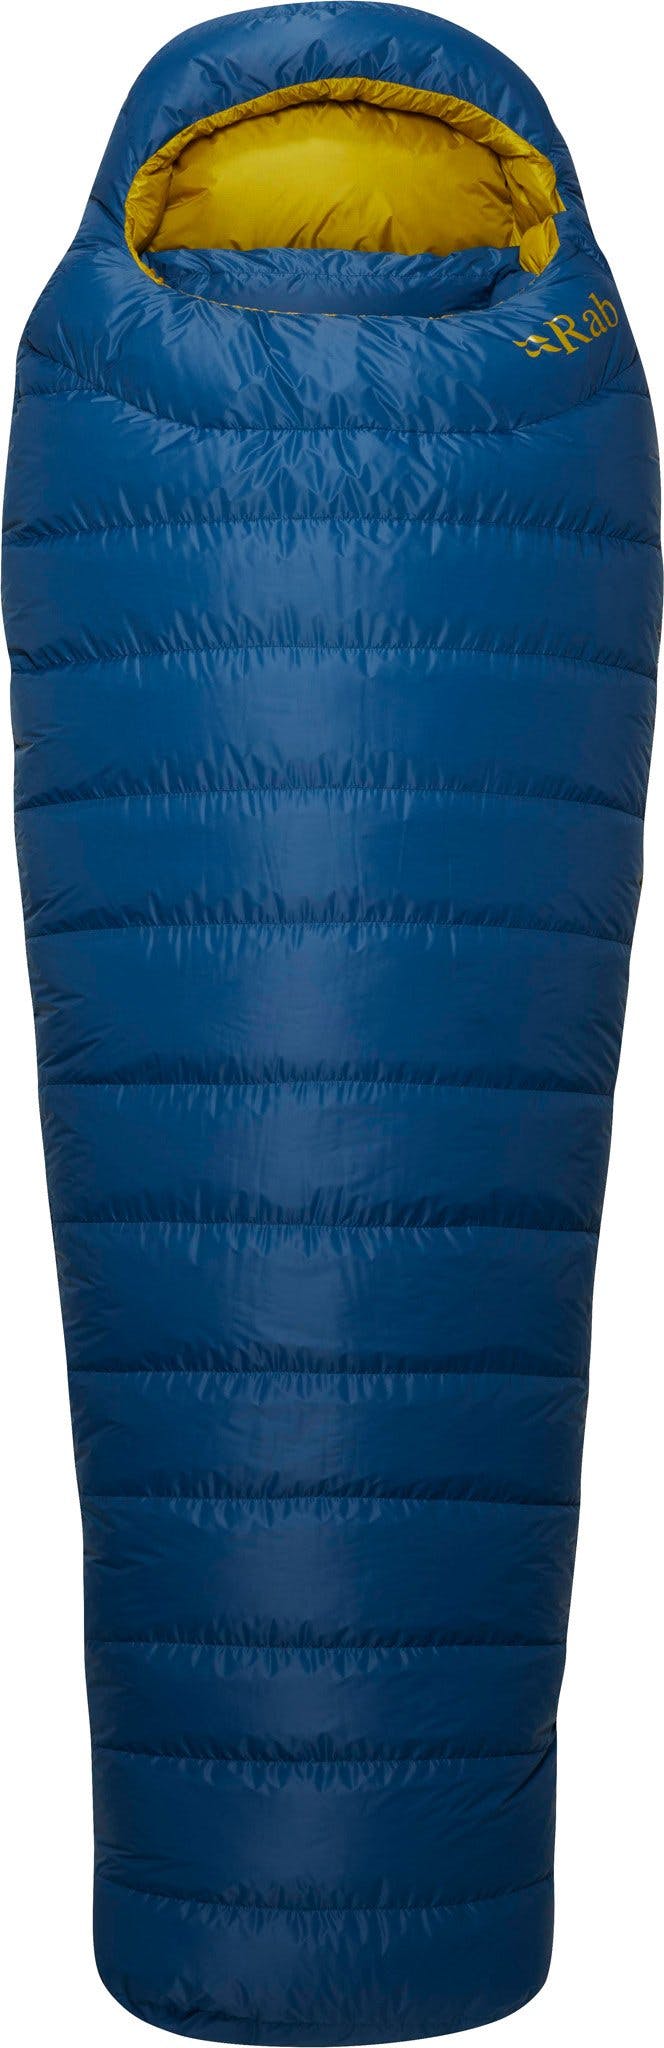 Product image for Ascent Pro 600 Down Sleeping Bag (-7C / 20F)